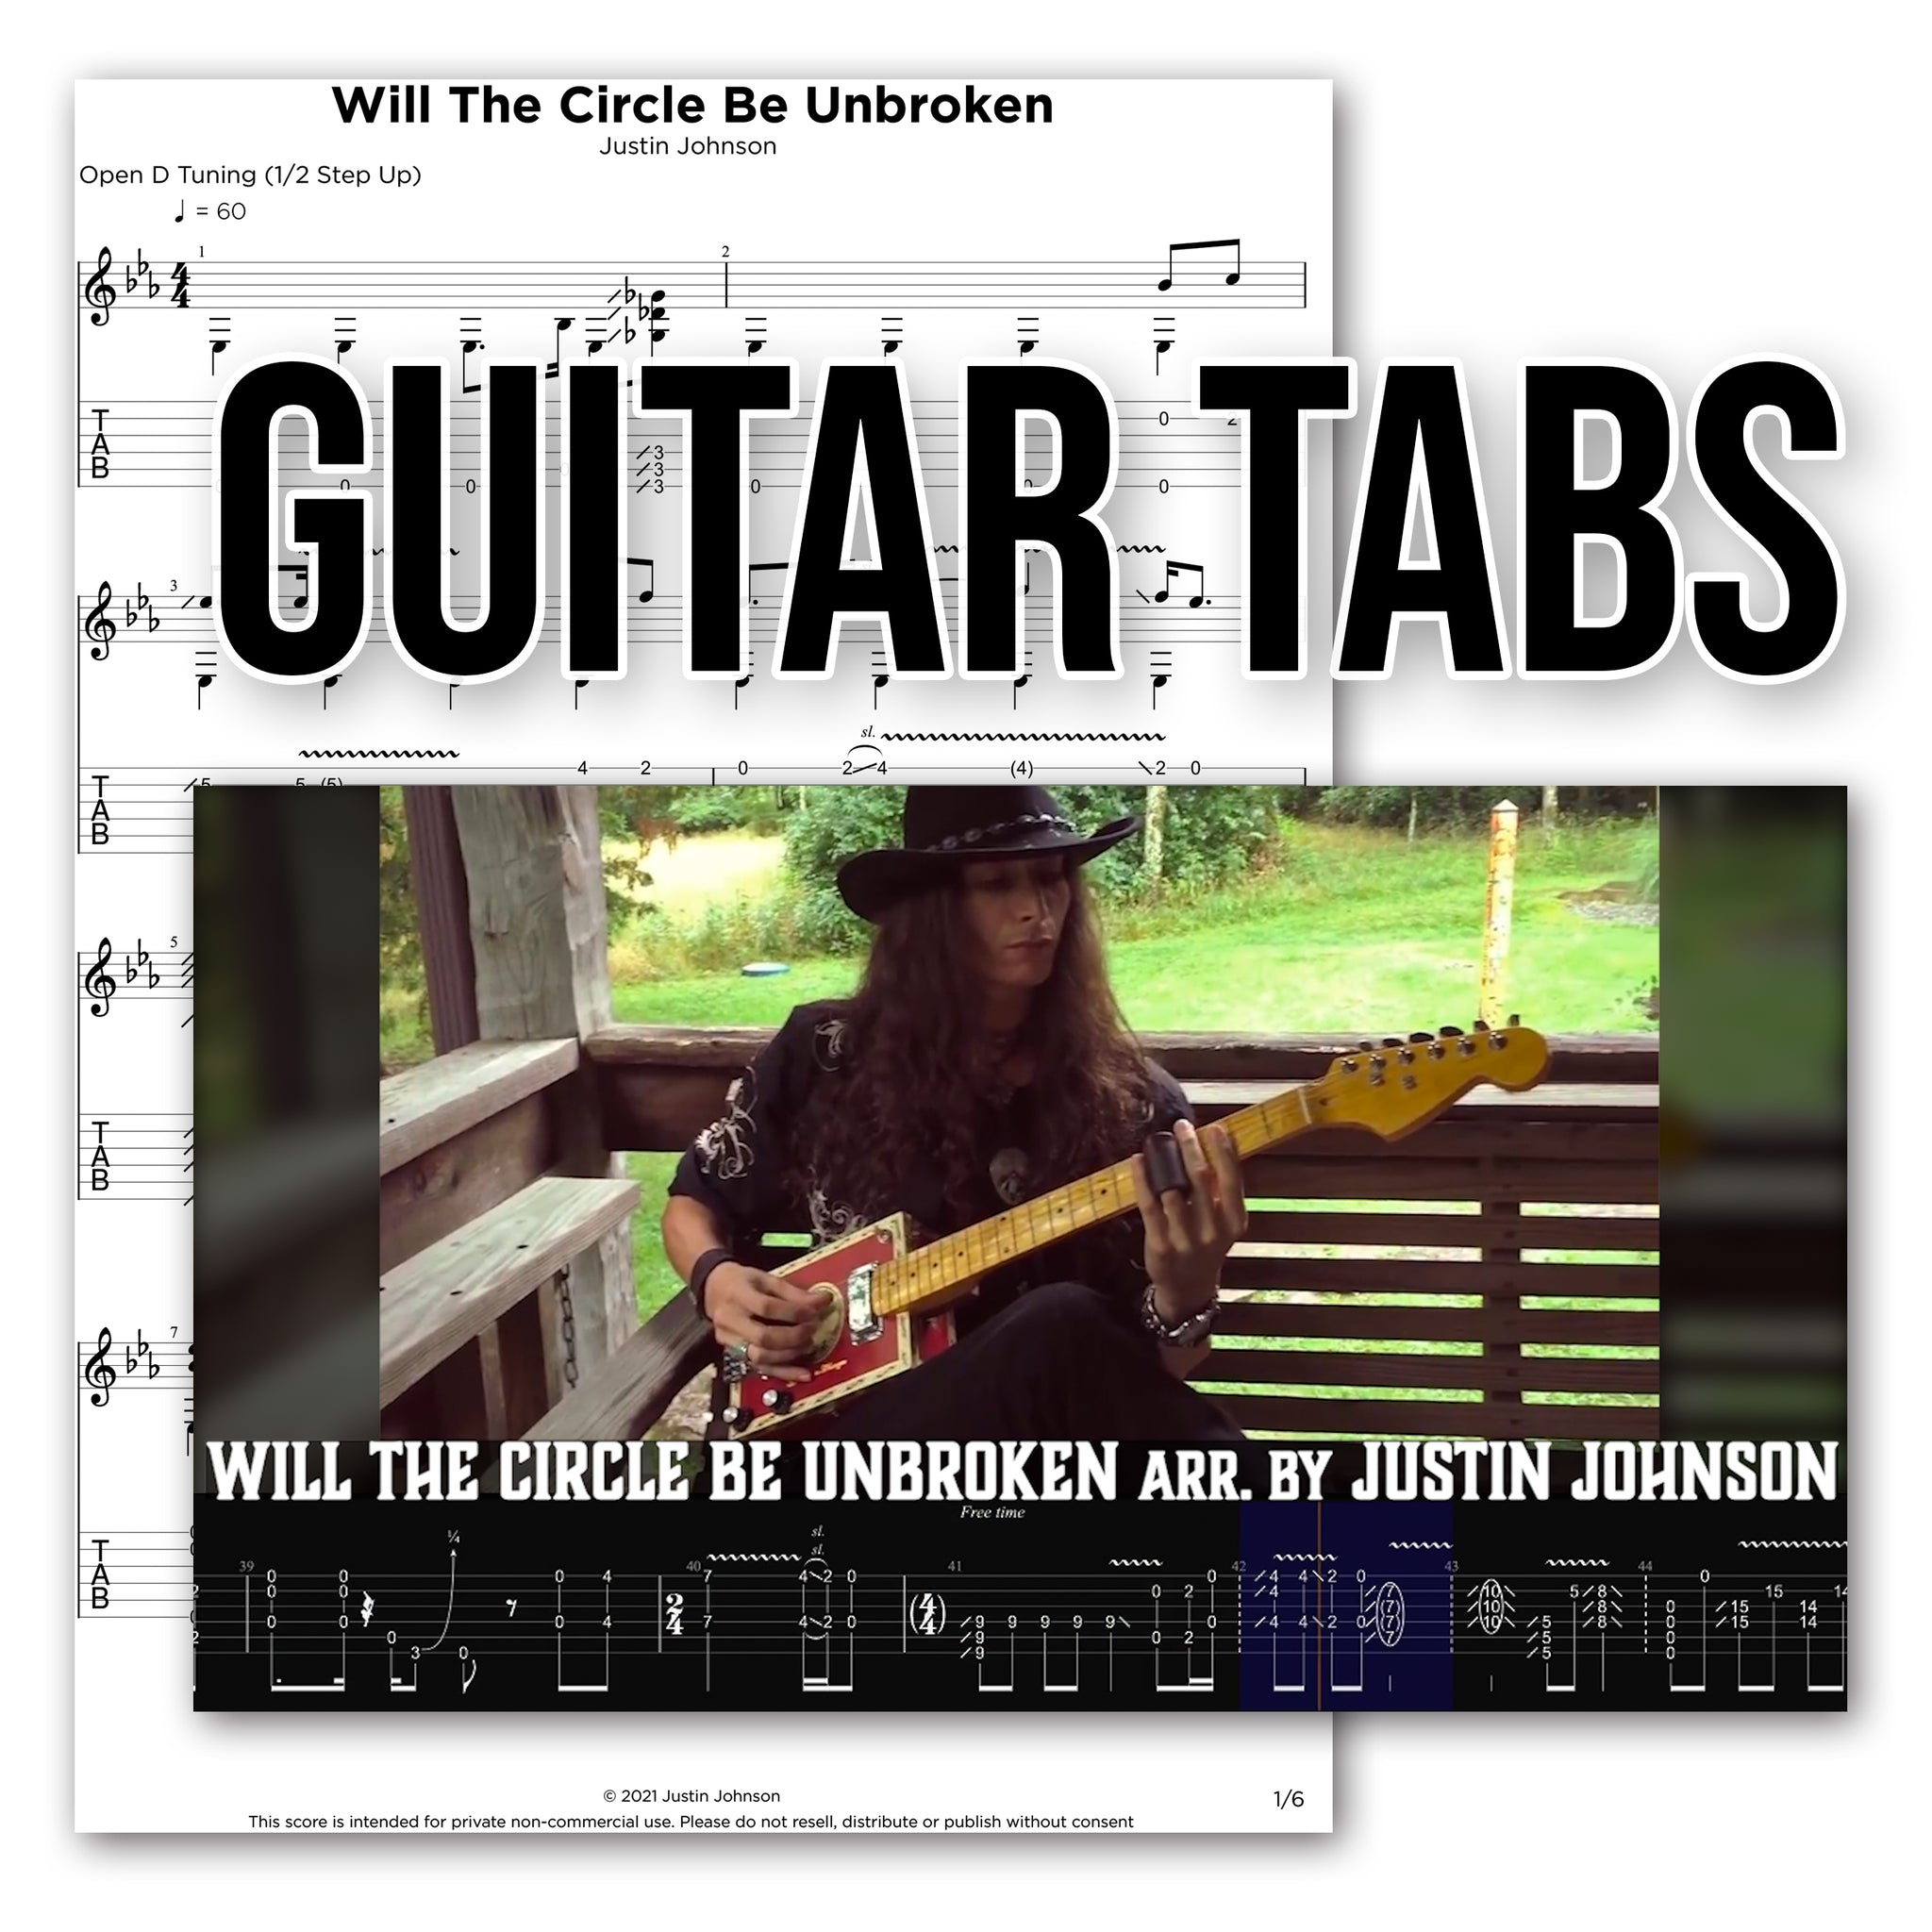 GUITAR TABS - "Will the Circle Be Unbroken"